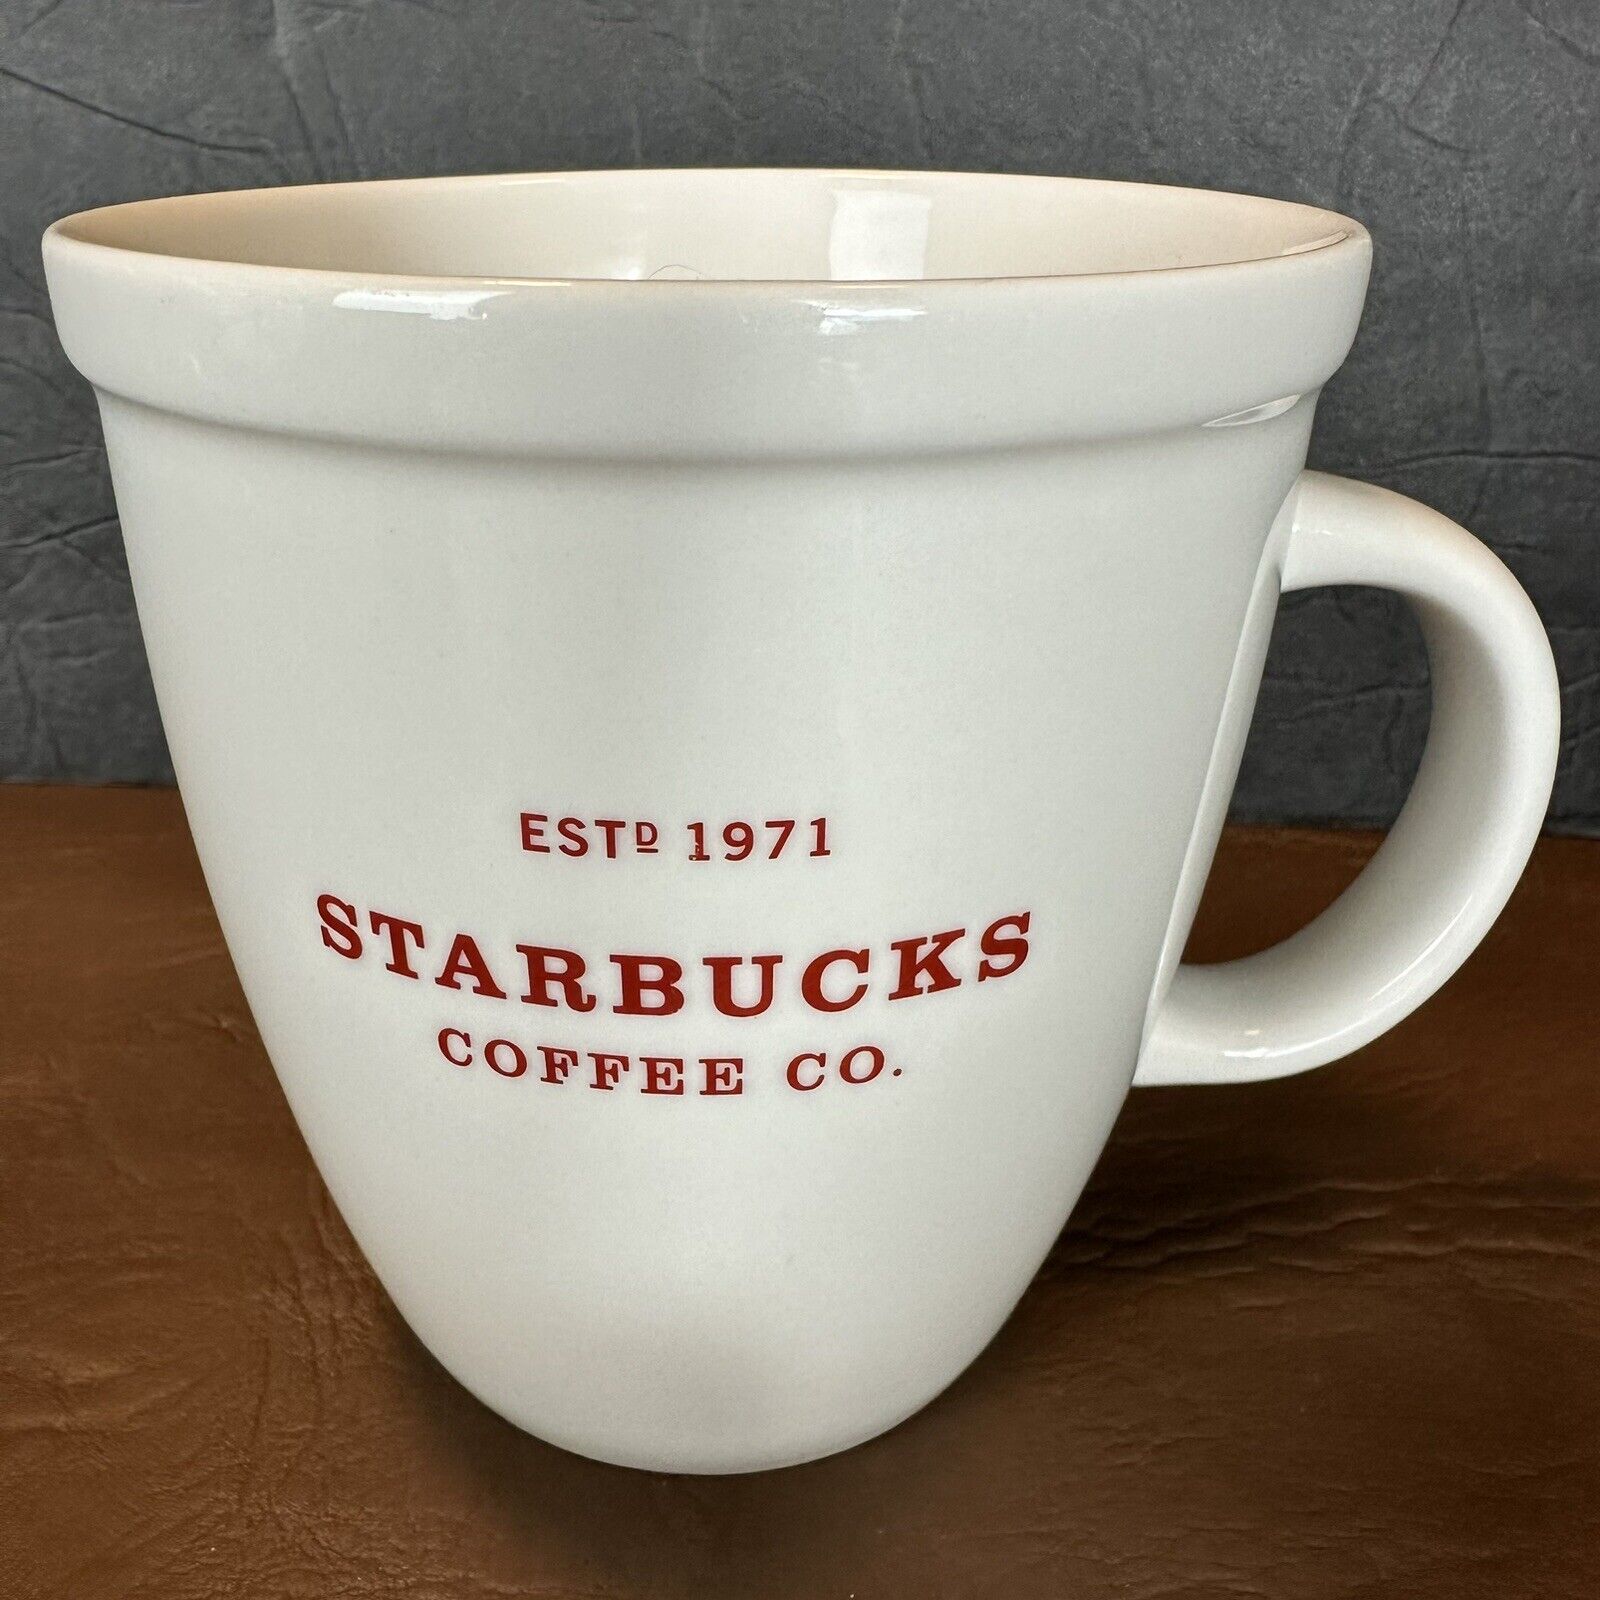 2007 STARBUCKS Holiday Mug Coffee Cup 18oz est. 1971 Red Lettering White